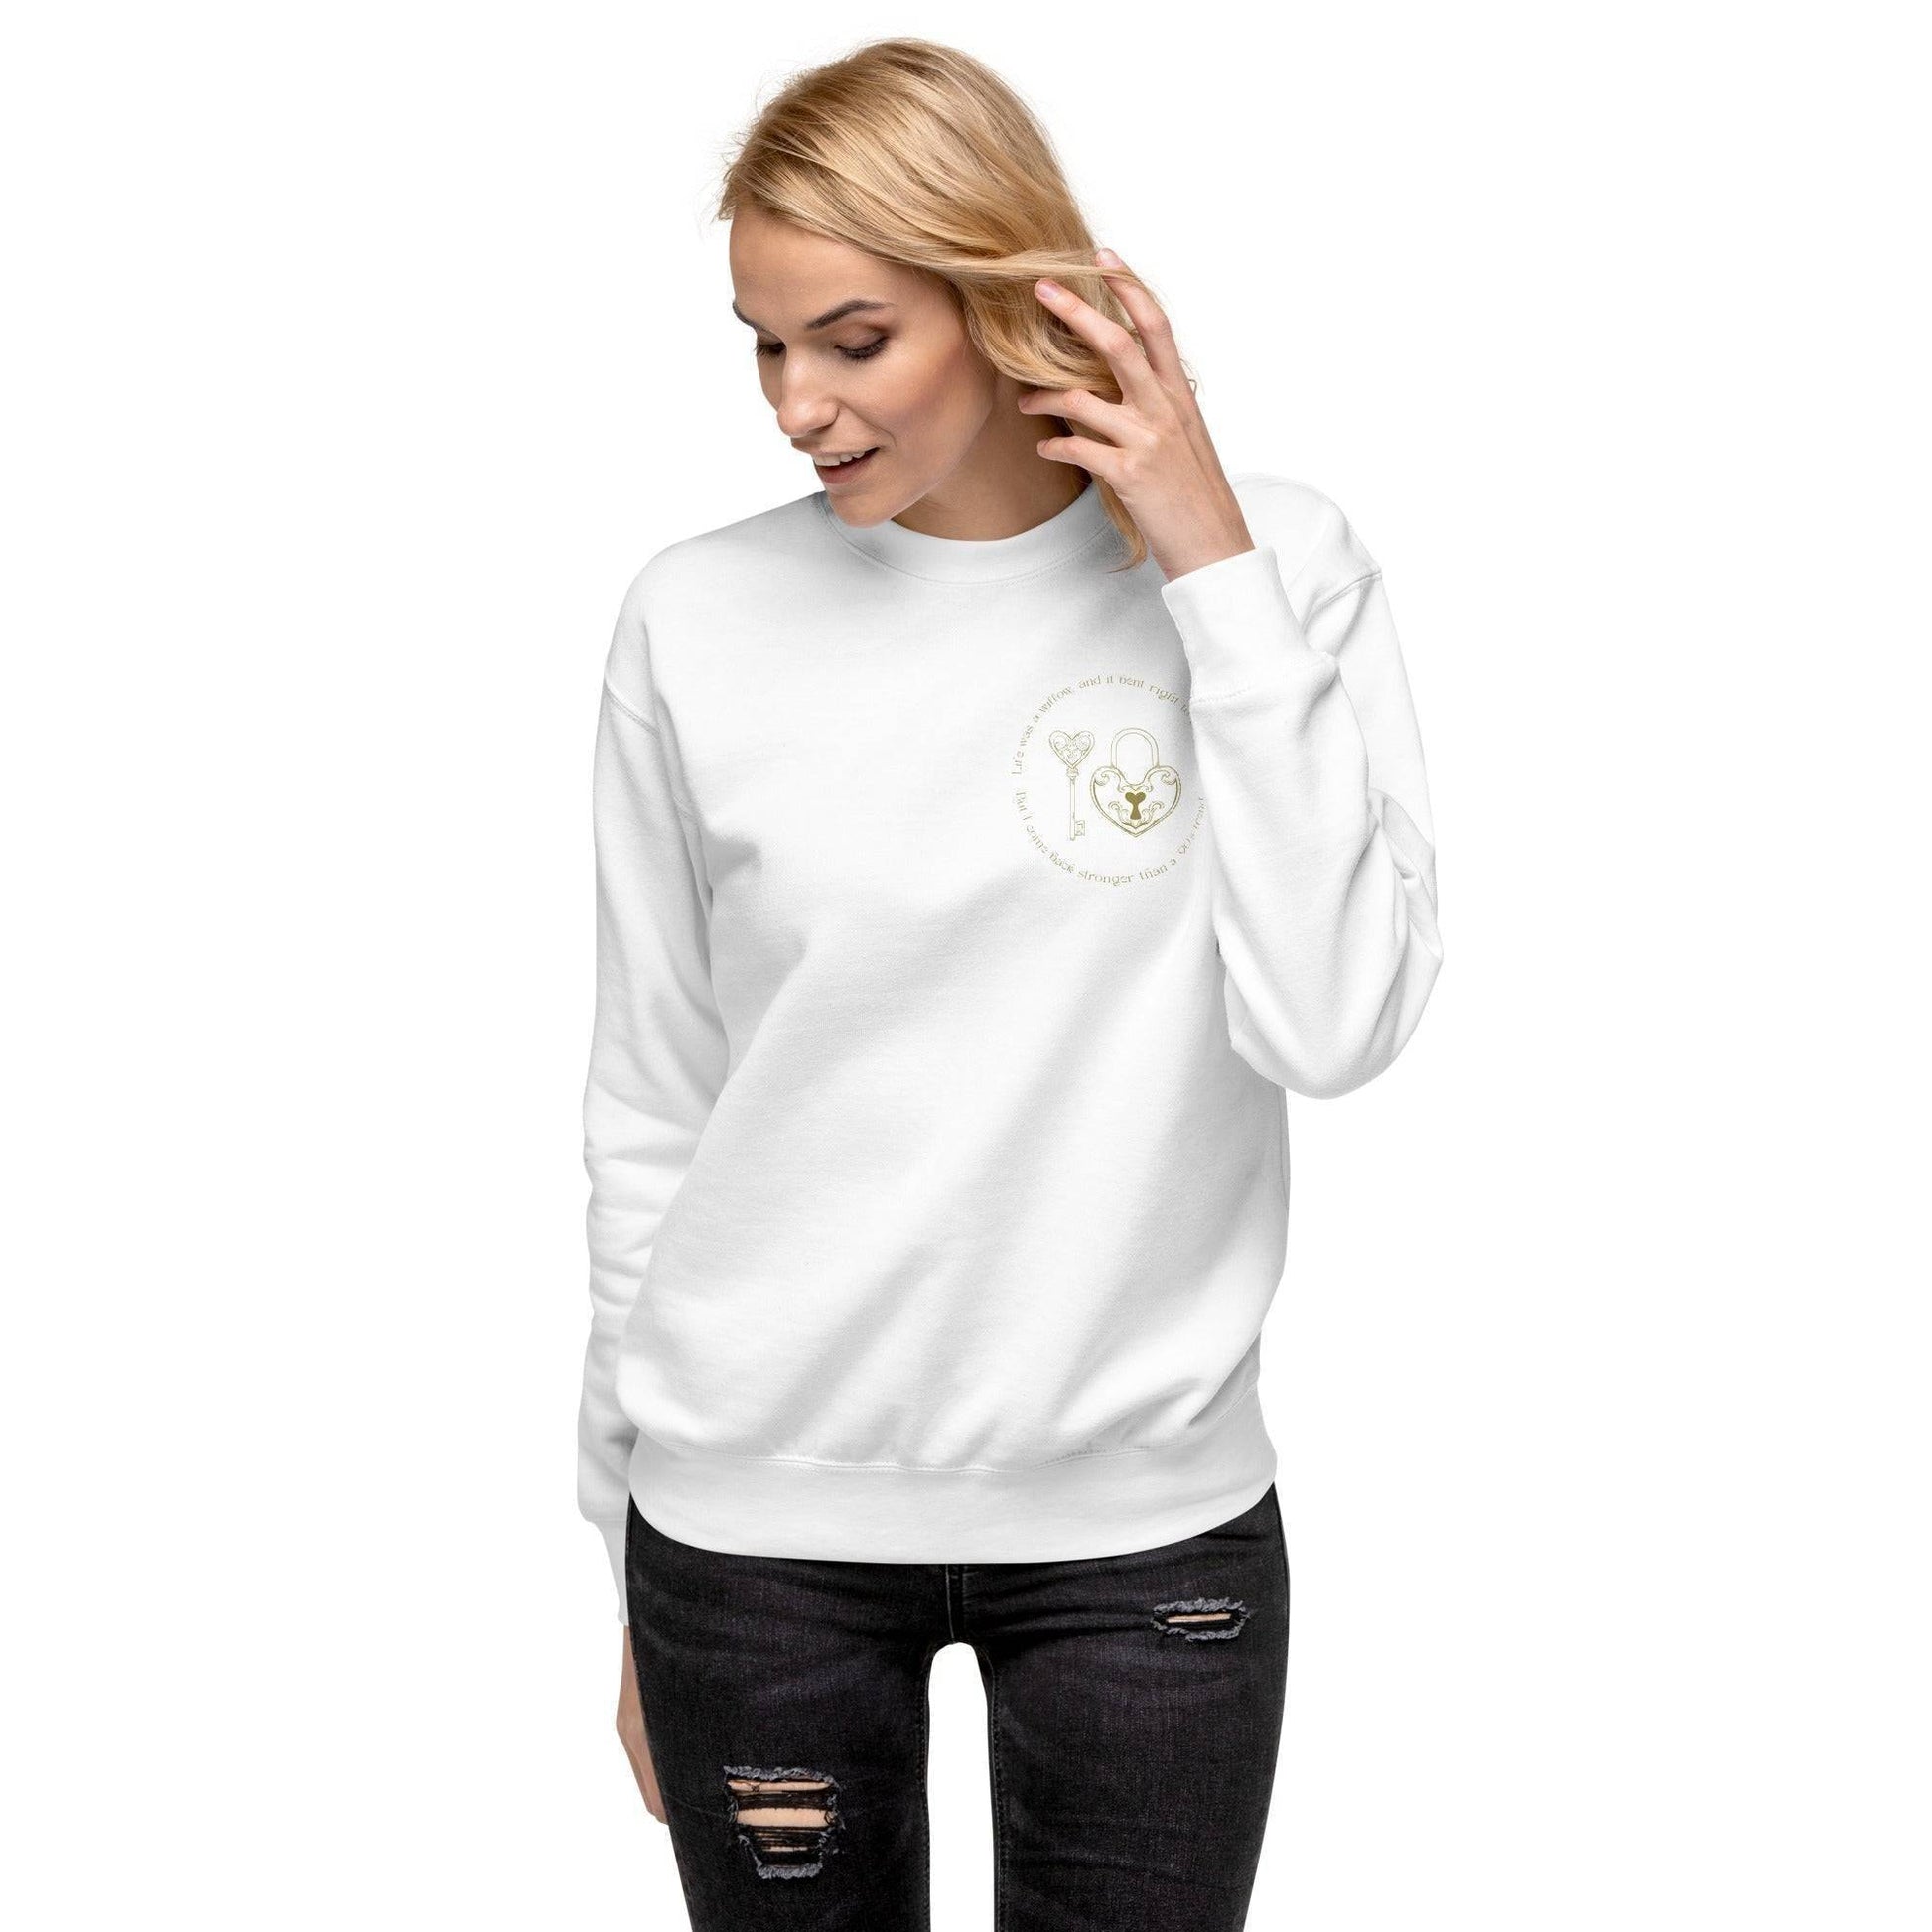 Taylor Swift Willow Embroidered Sweatshirt White